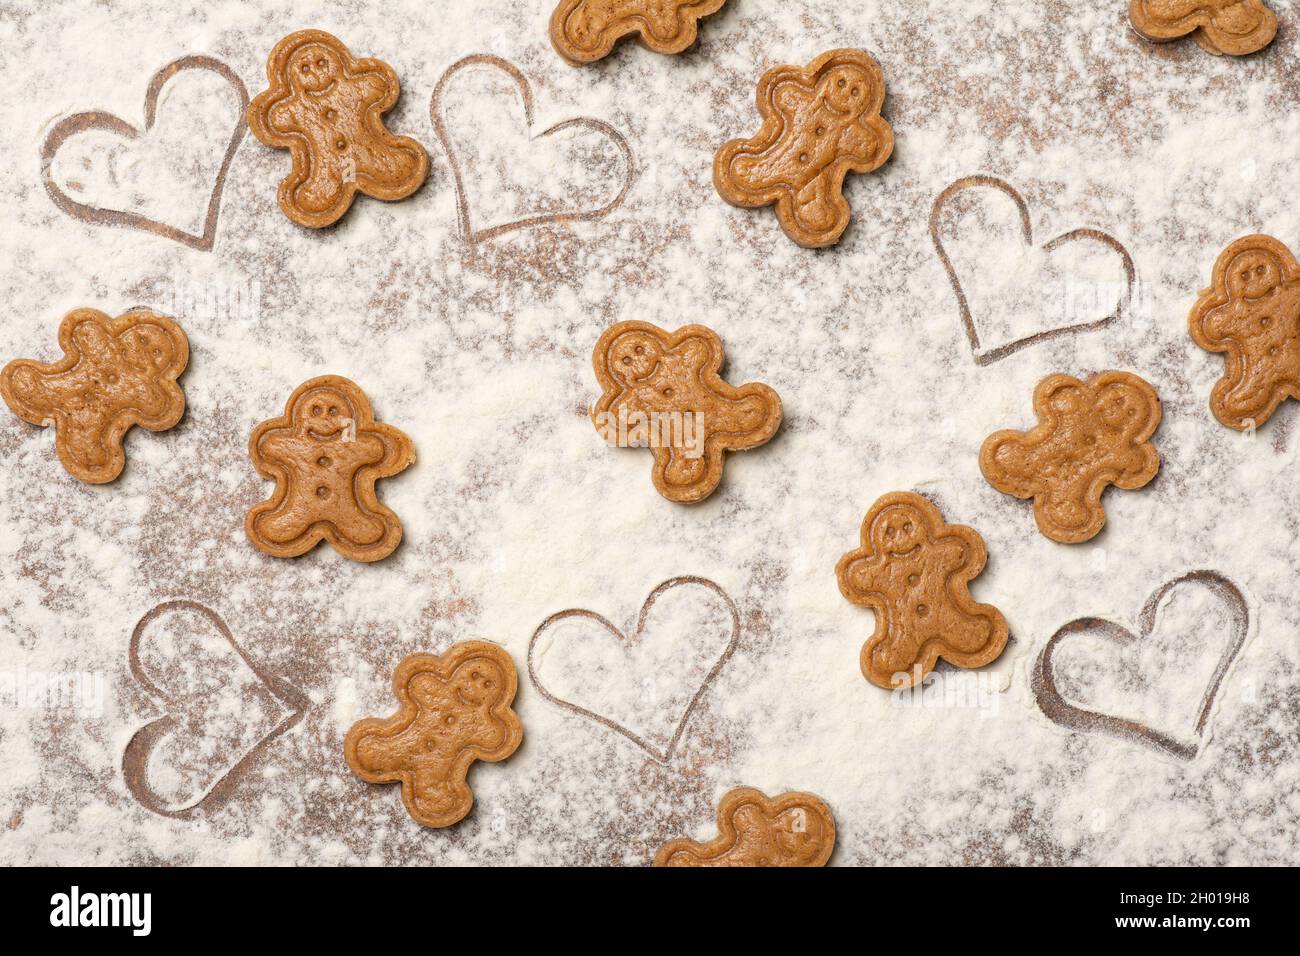 Festive Christmas pattern made of unbaked gingerbread cookies and heart-shaped marks on the kitchen work surface sprinkled with flour. Table top view. Stock Photo